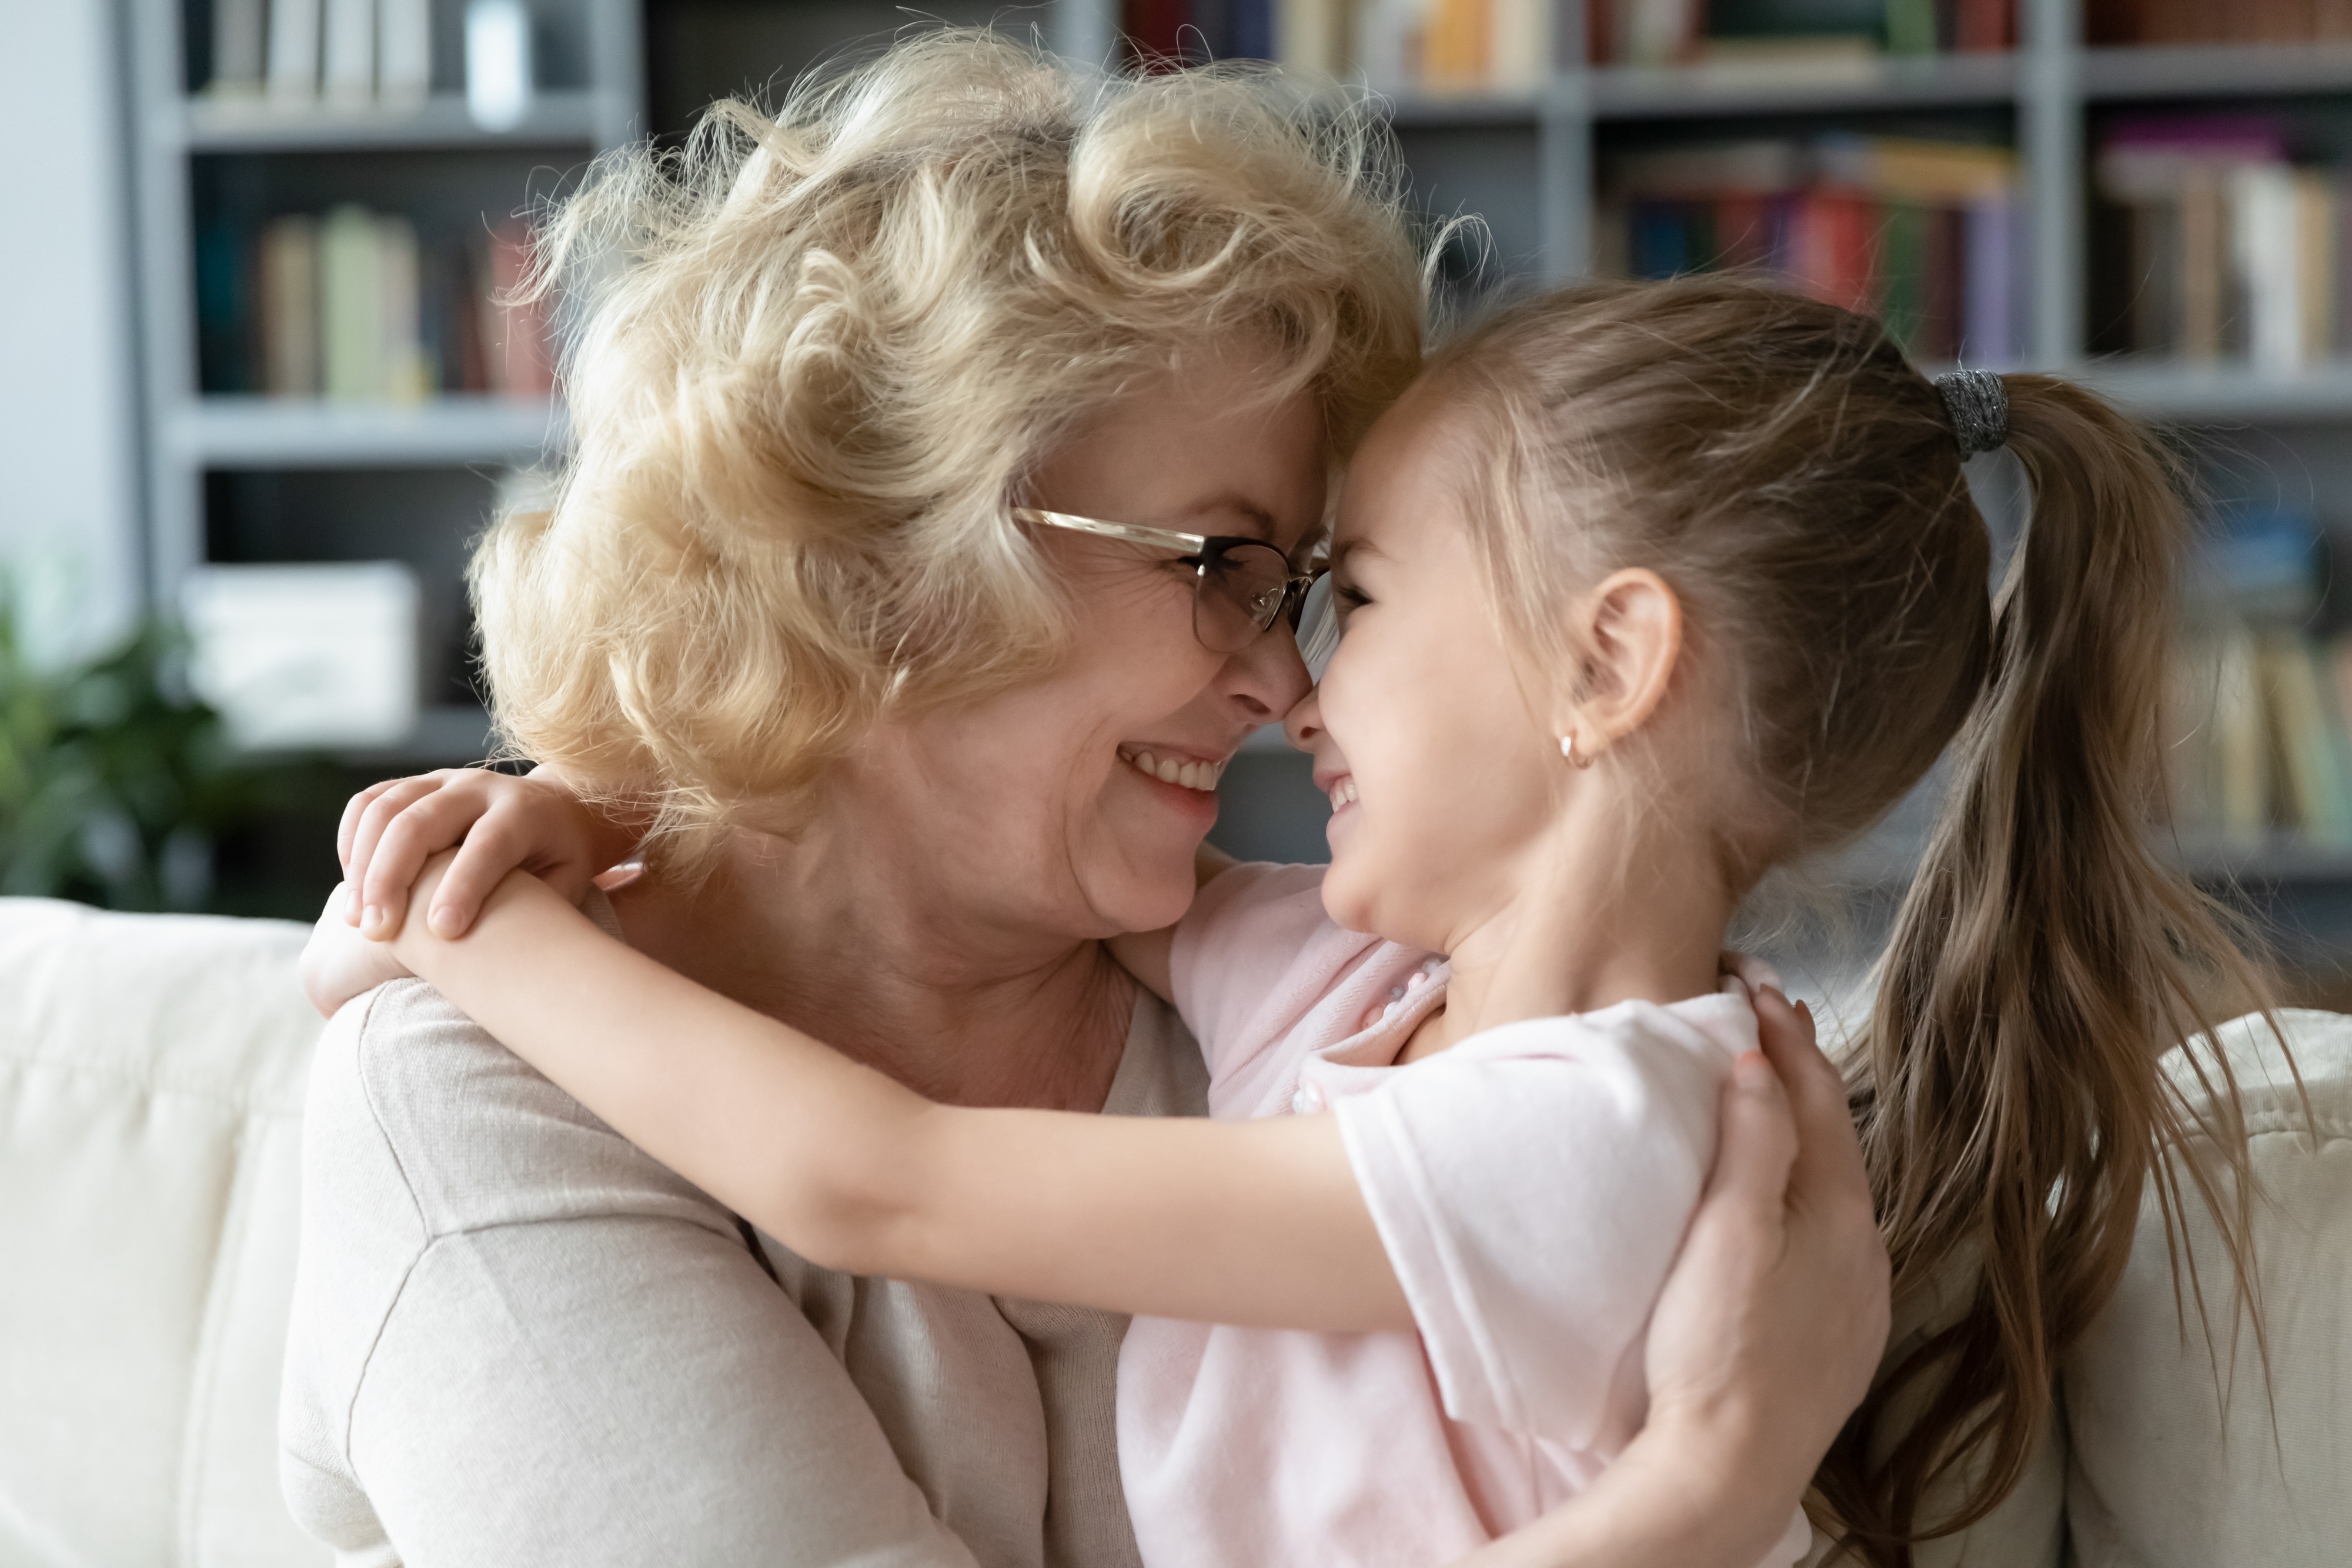 A happy grandmother hugging her young granddaughter | Source: Shutterstock